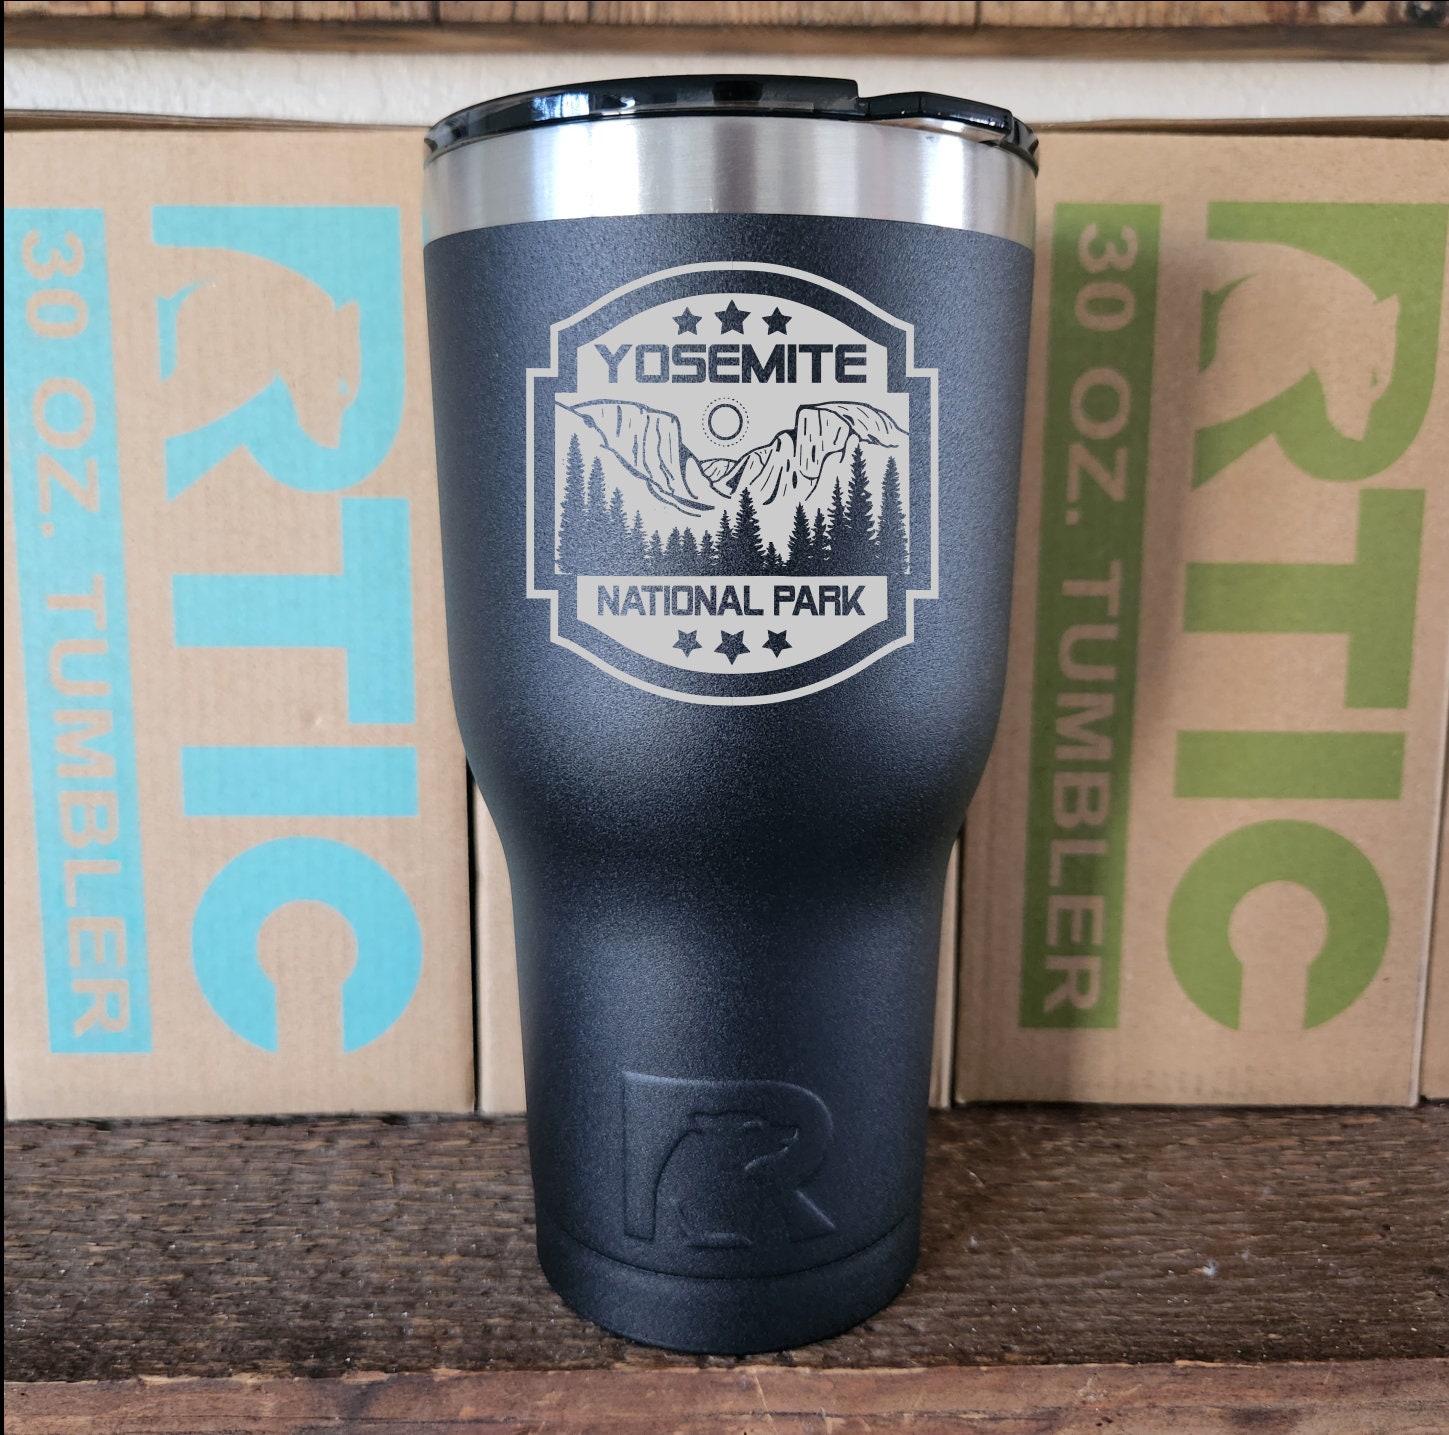 30oz RTIC Road Trip Tumbler NEW Design Comes With Straw -  Israel